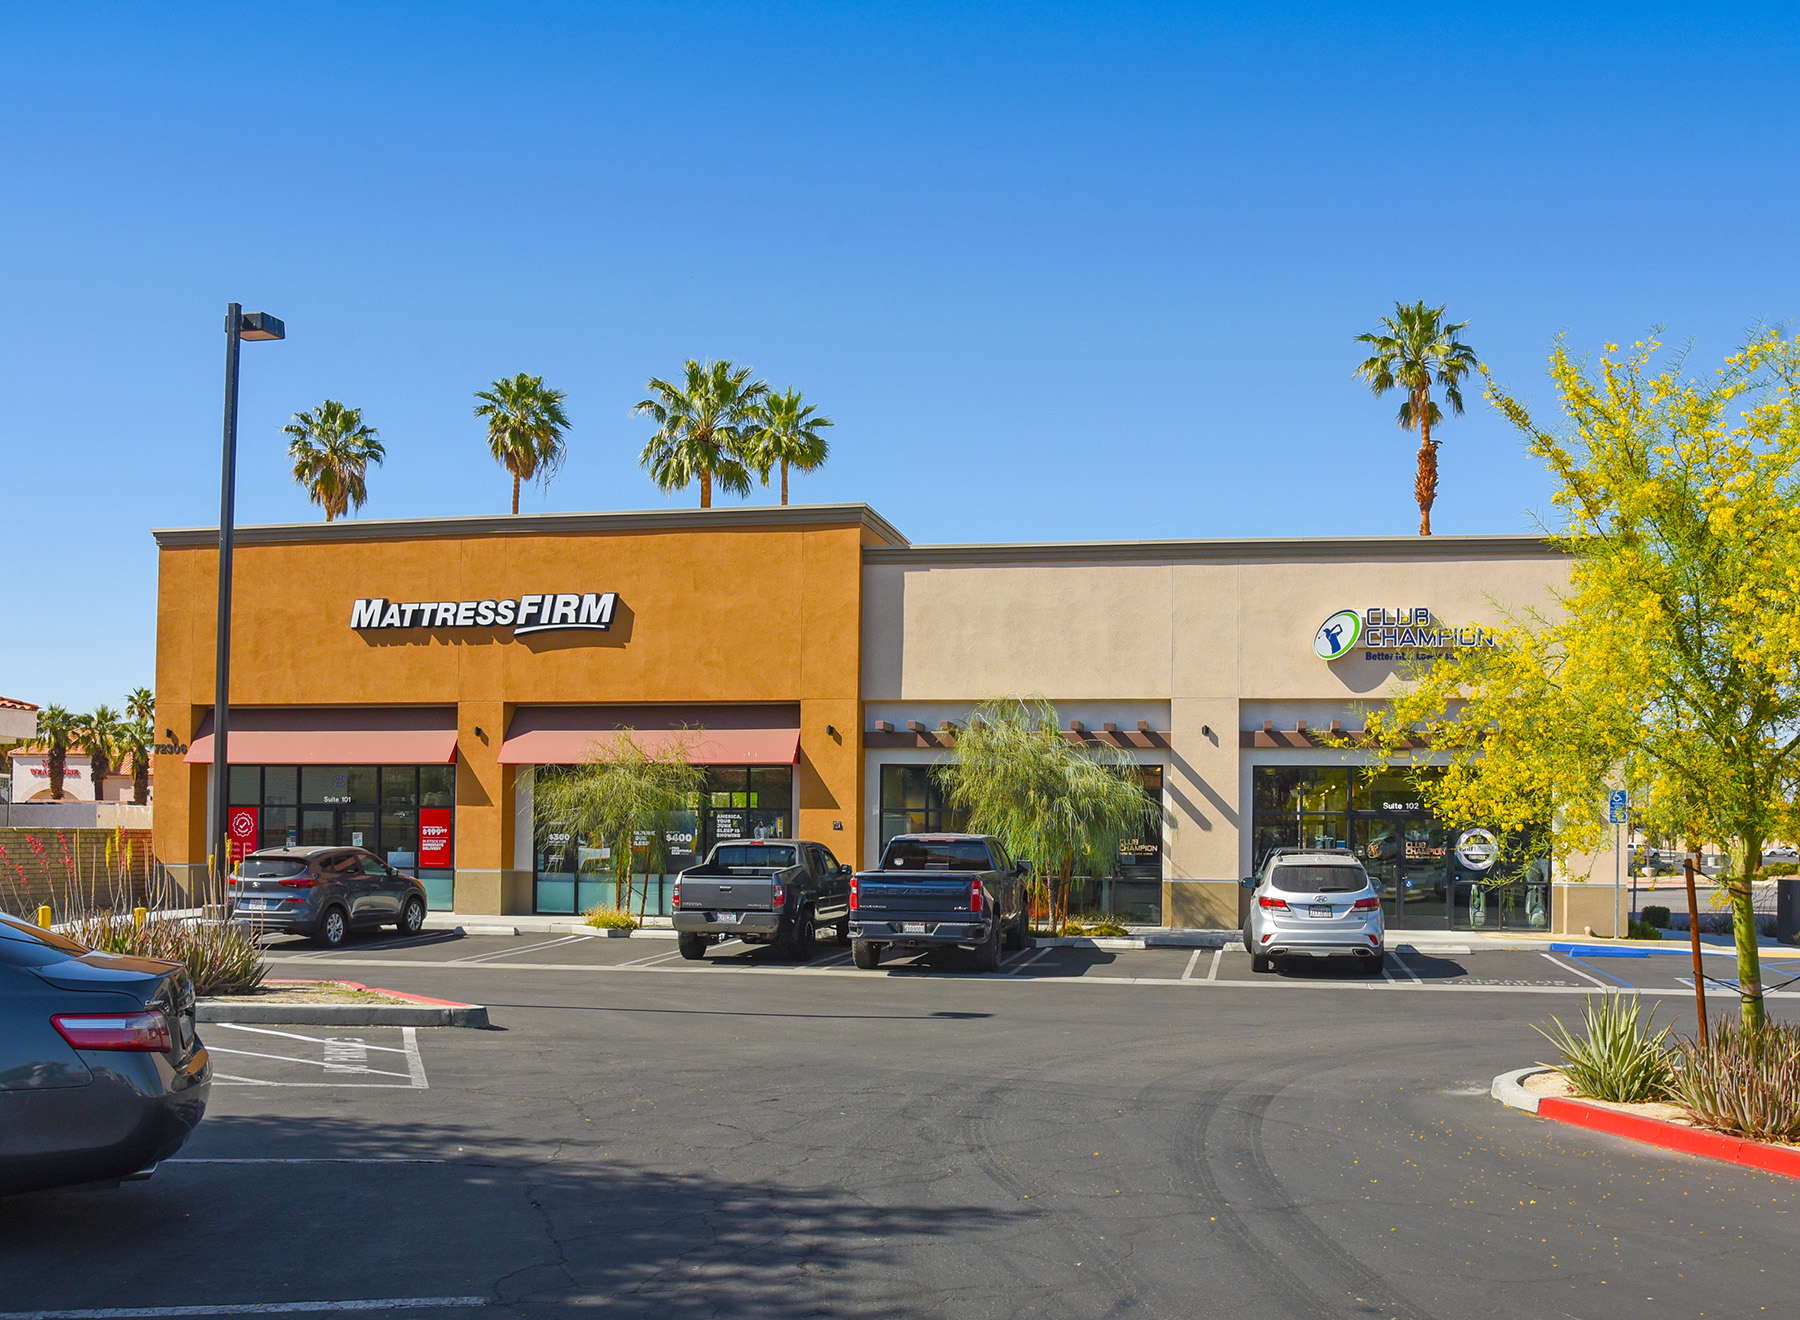 Hanley Investment Group Arranges Sale of a Two-Tenant Outparcel to Walmart Neighborhood Market in Palm Desert, Calif., for $5 Million